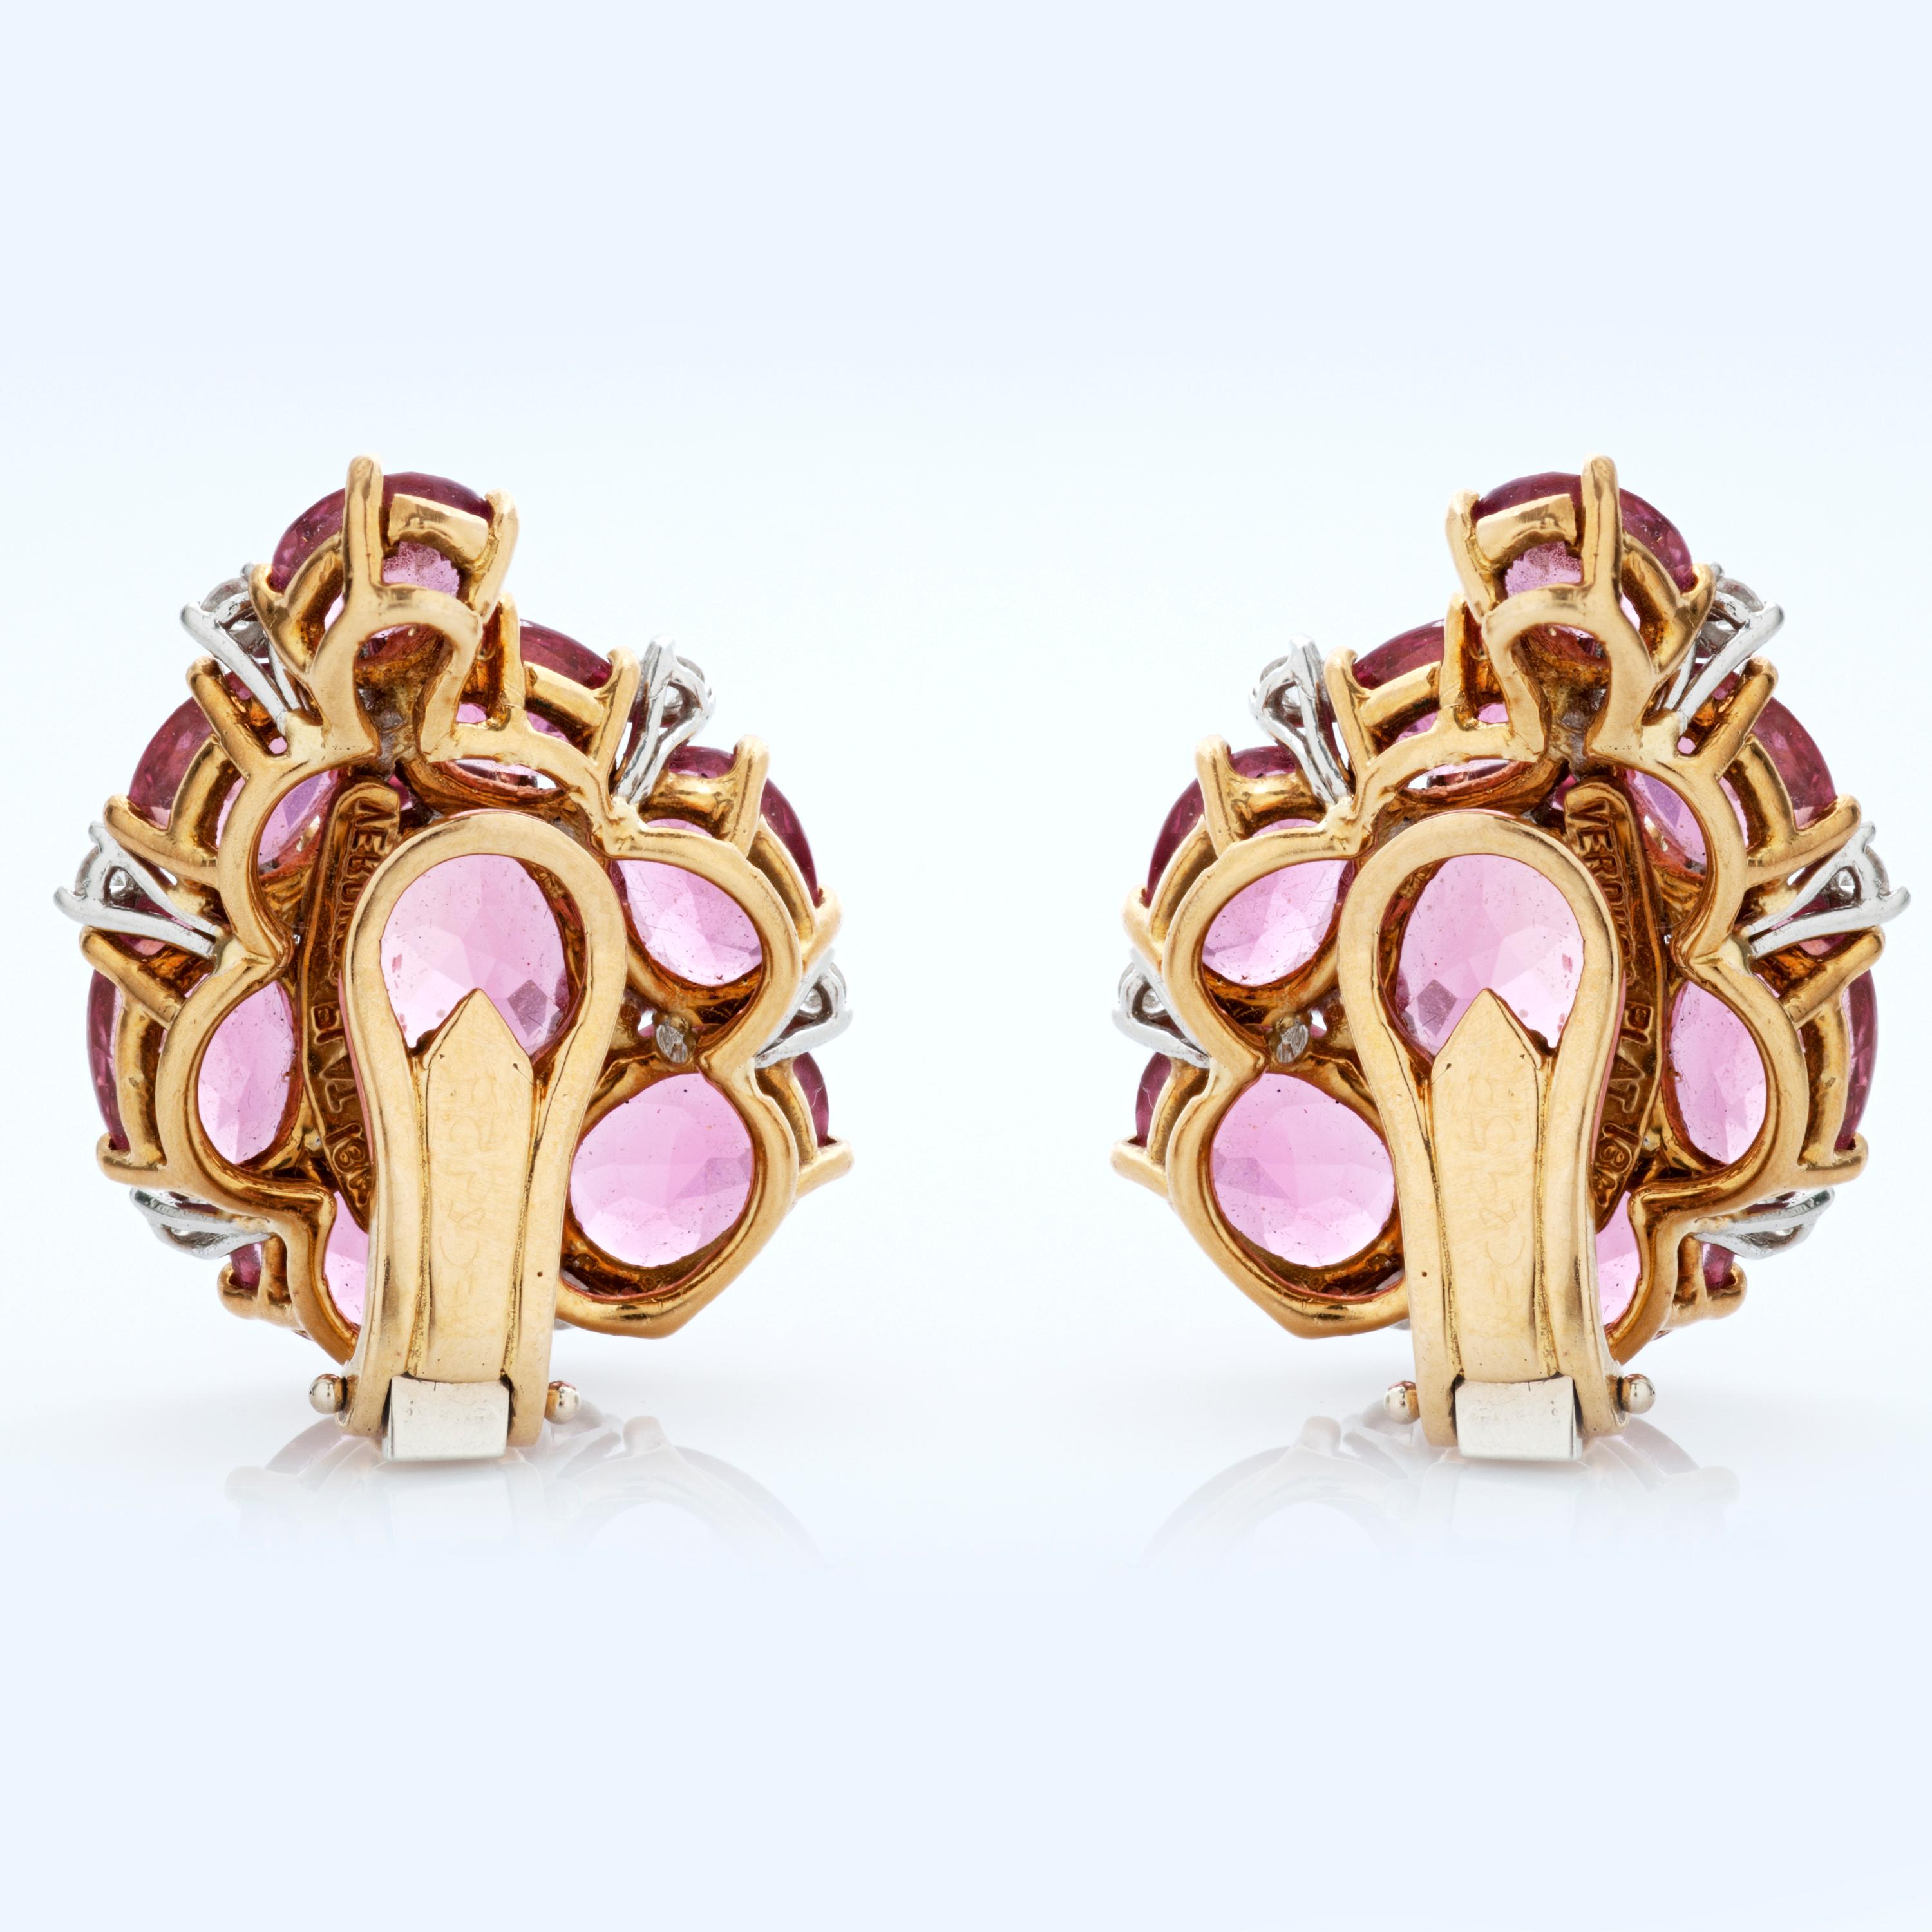 Oval Cut Verdura Diamond and Pink Tourmaline Paisley Ear Clips in 18K Yellow Gold